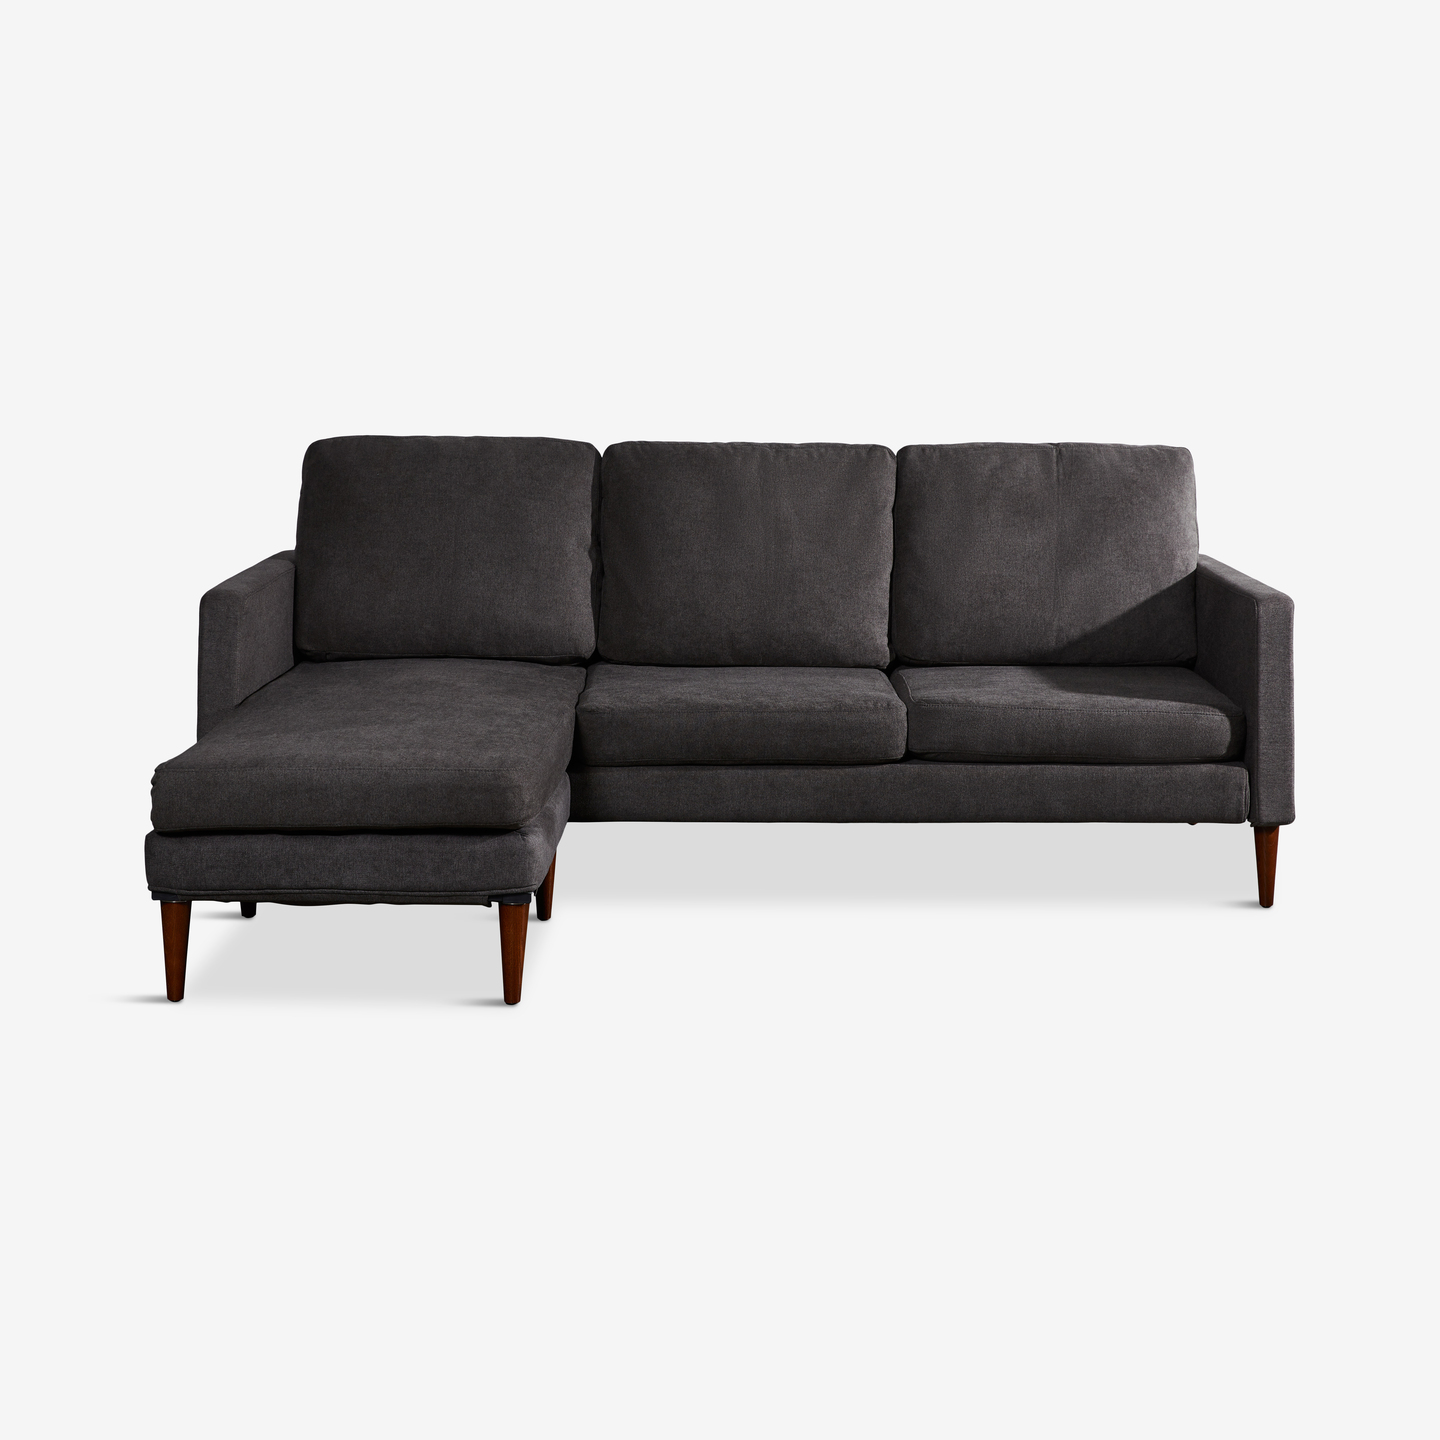 480_Campaign-Sofa-Sectional-Flint-Grey_Flat-Front 2020